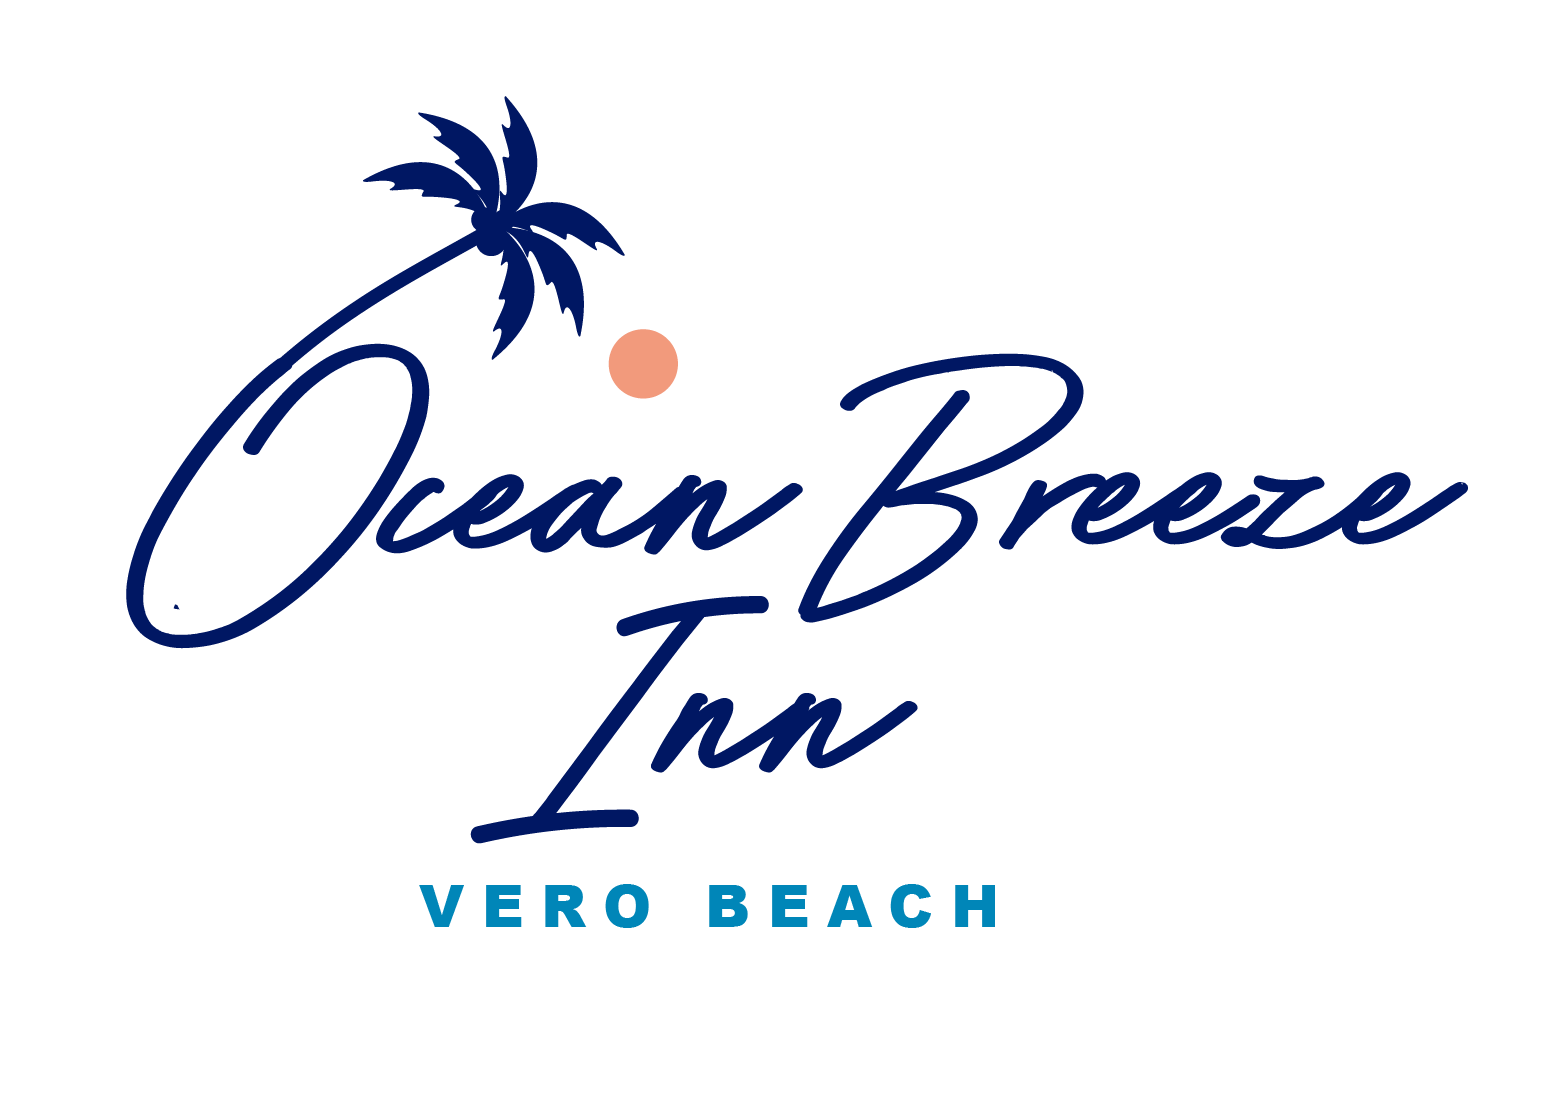 Logo of ocean breeze inn featuring stylized text and a palm tree motif, with 